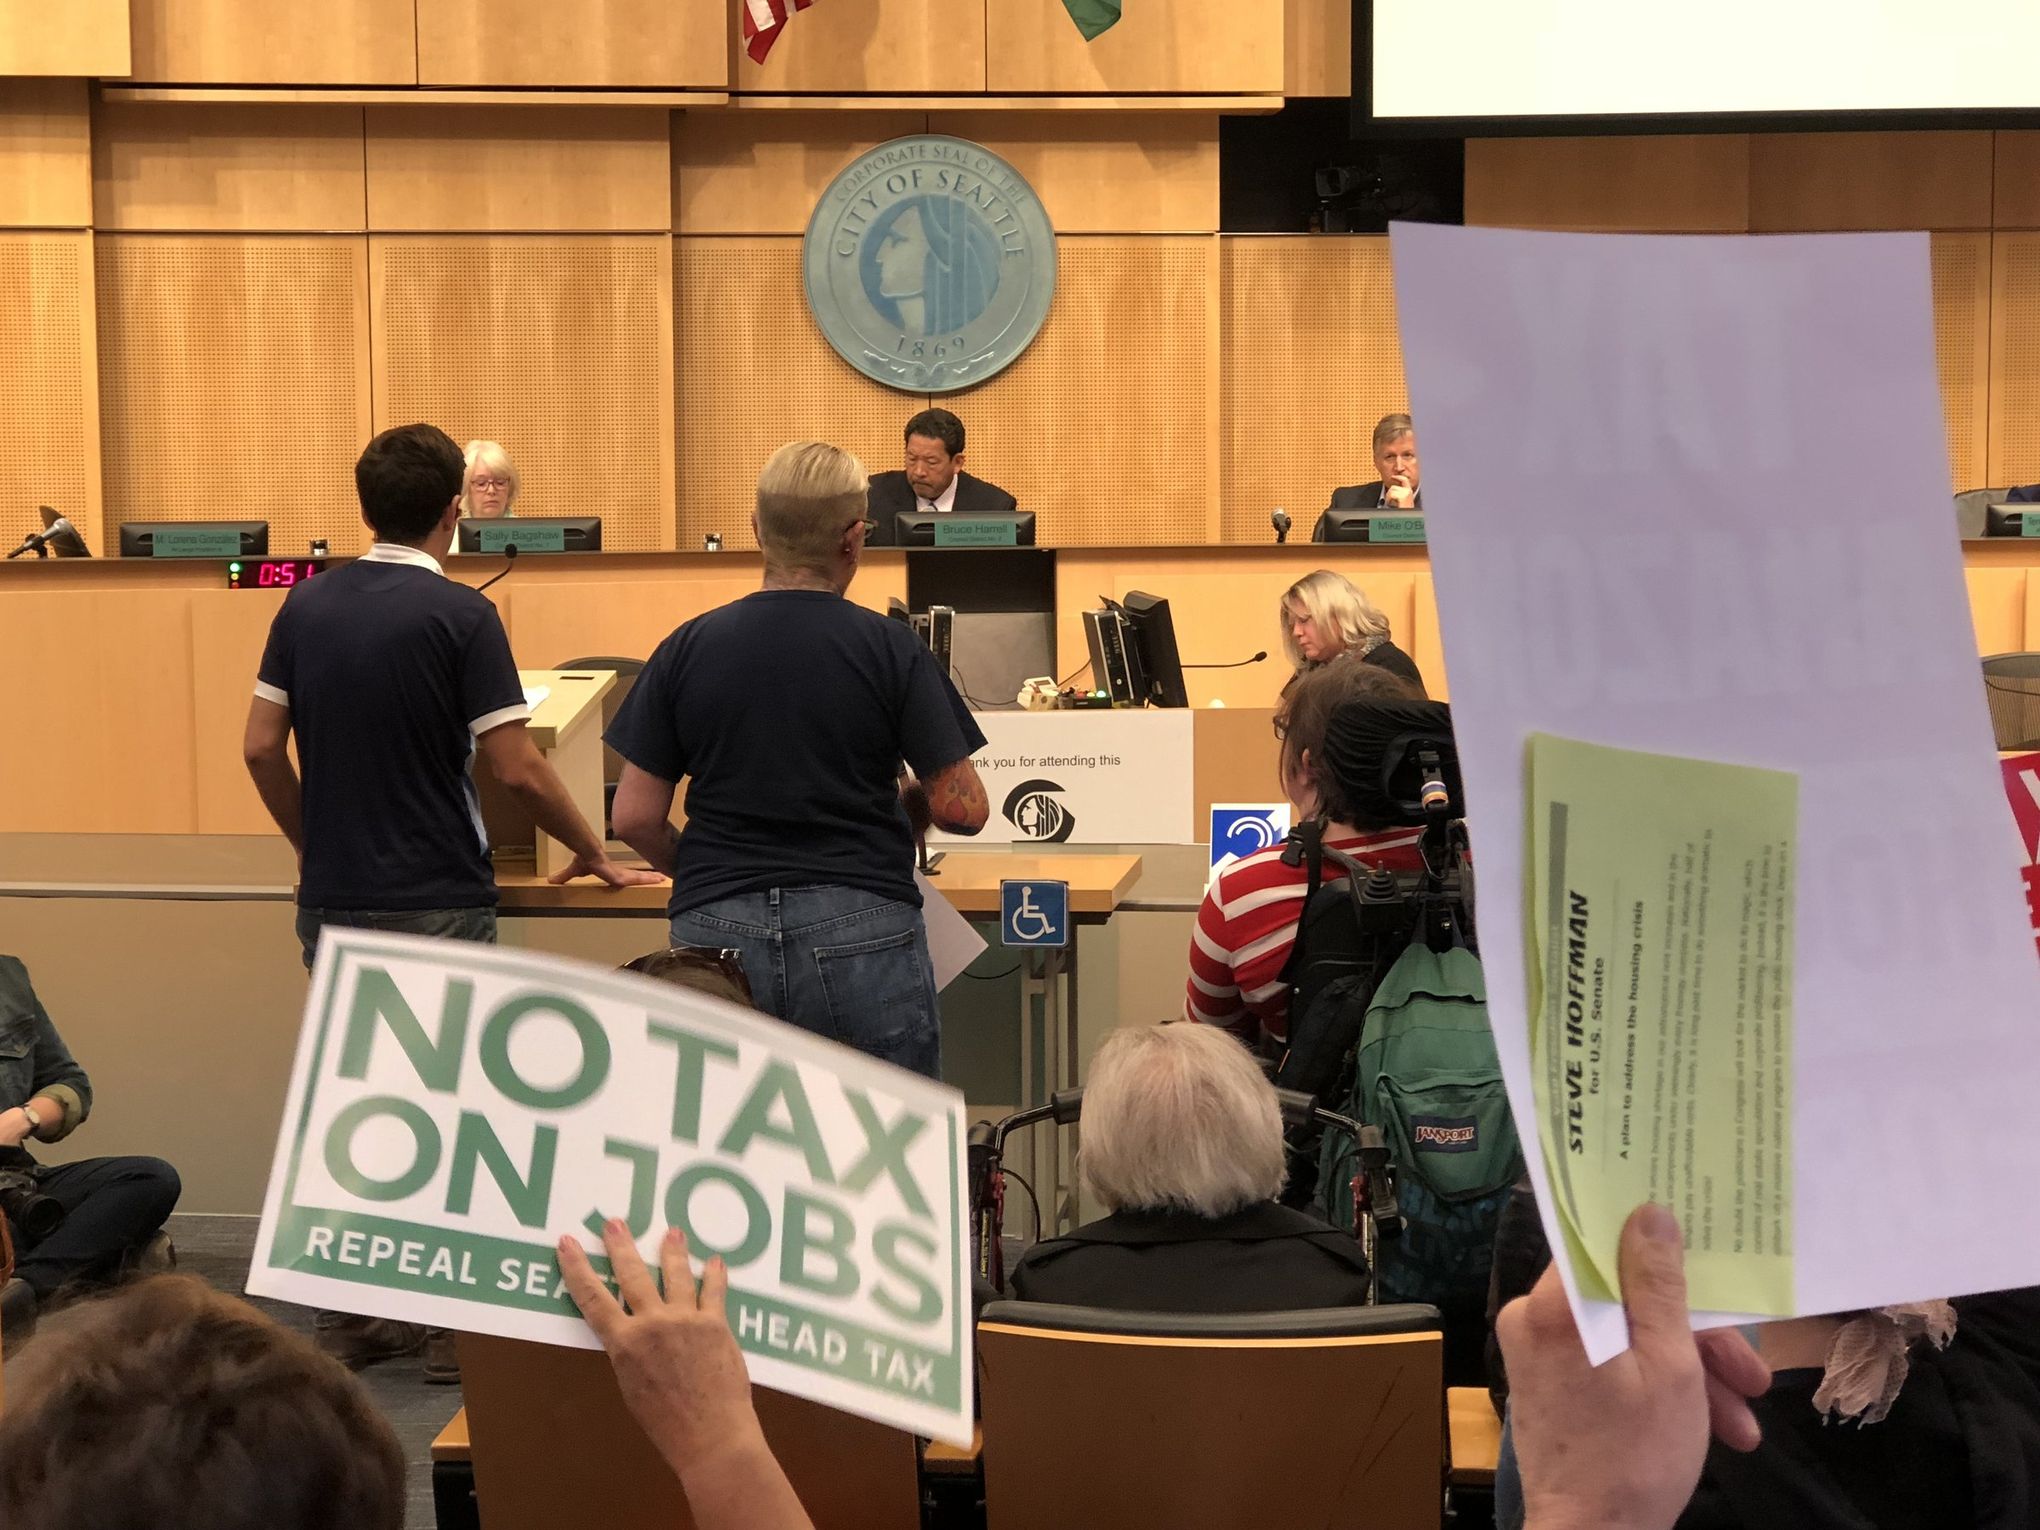 Time to fight back: Repeal Seattle's head tax